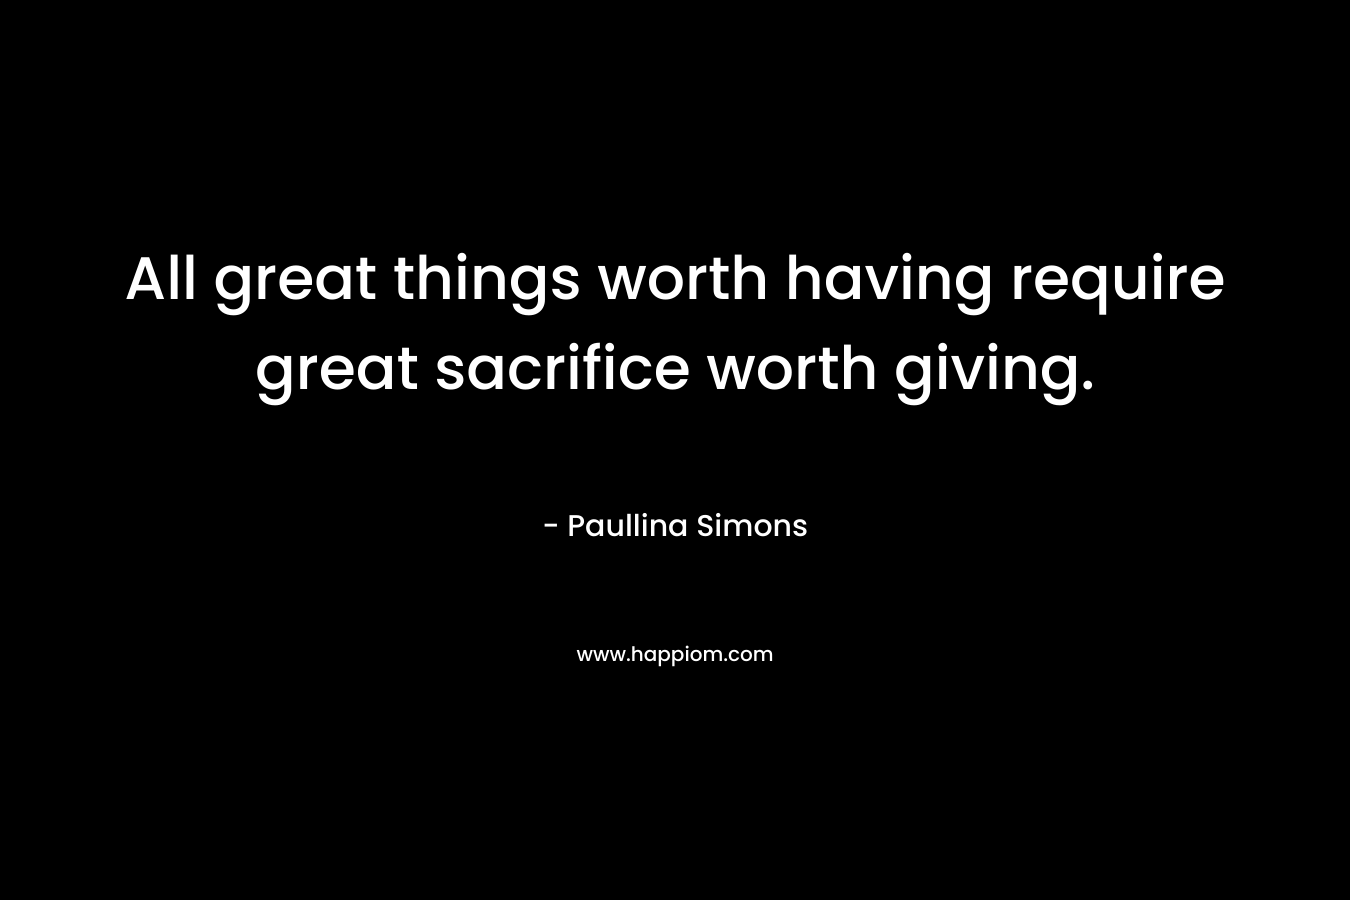 All great things worth having require great sacrifice worth giving.